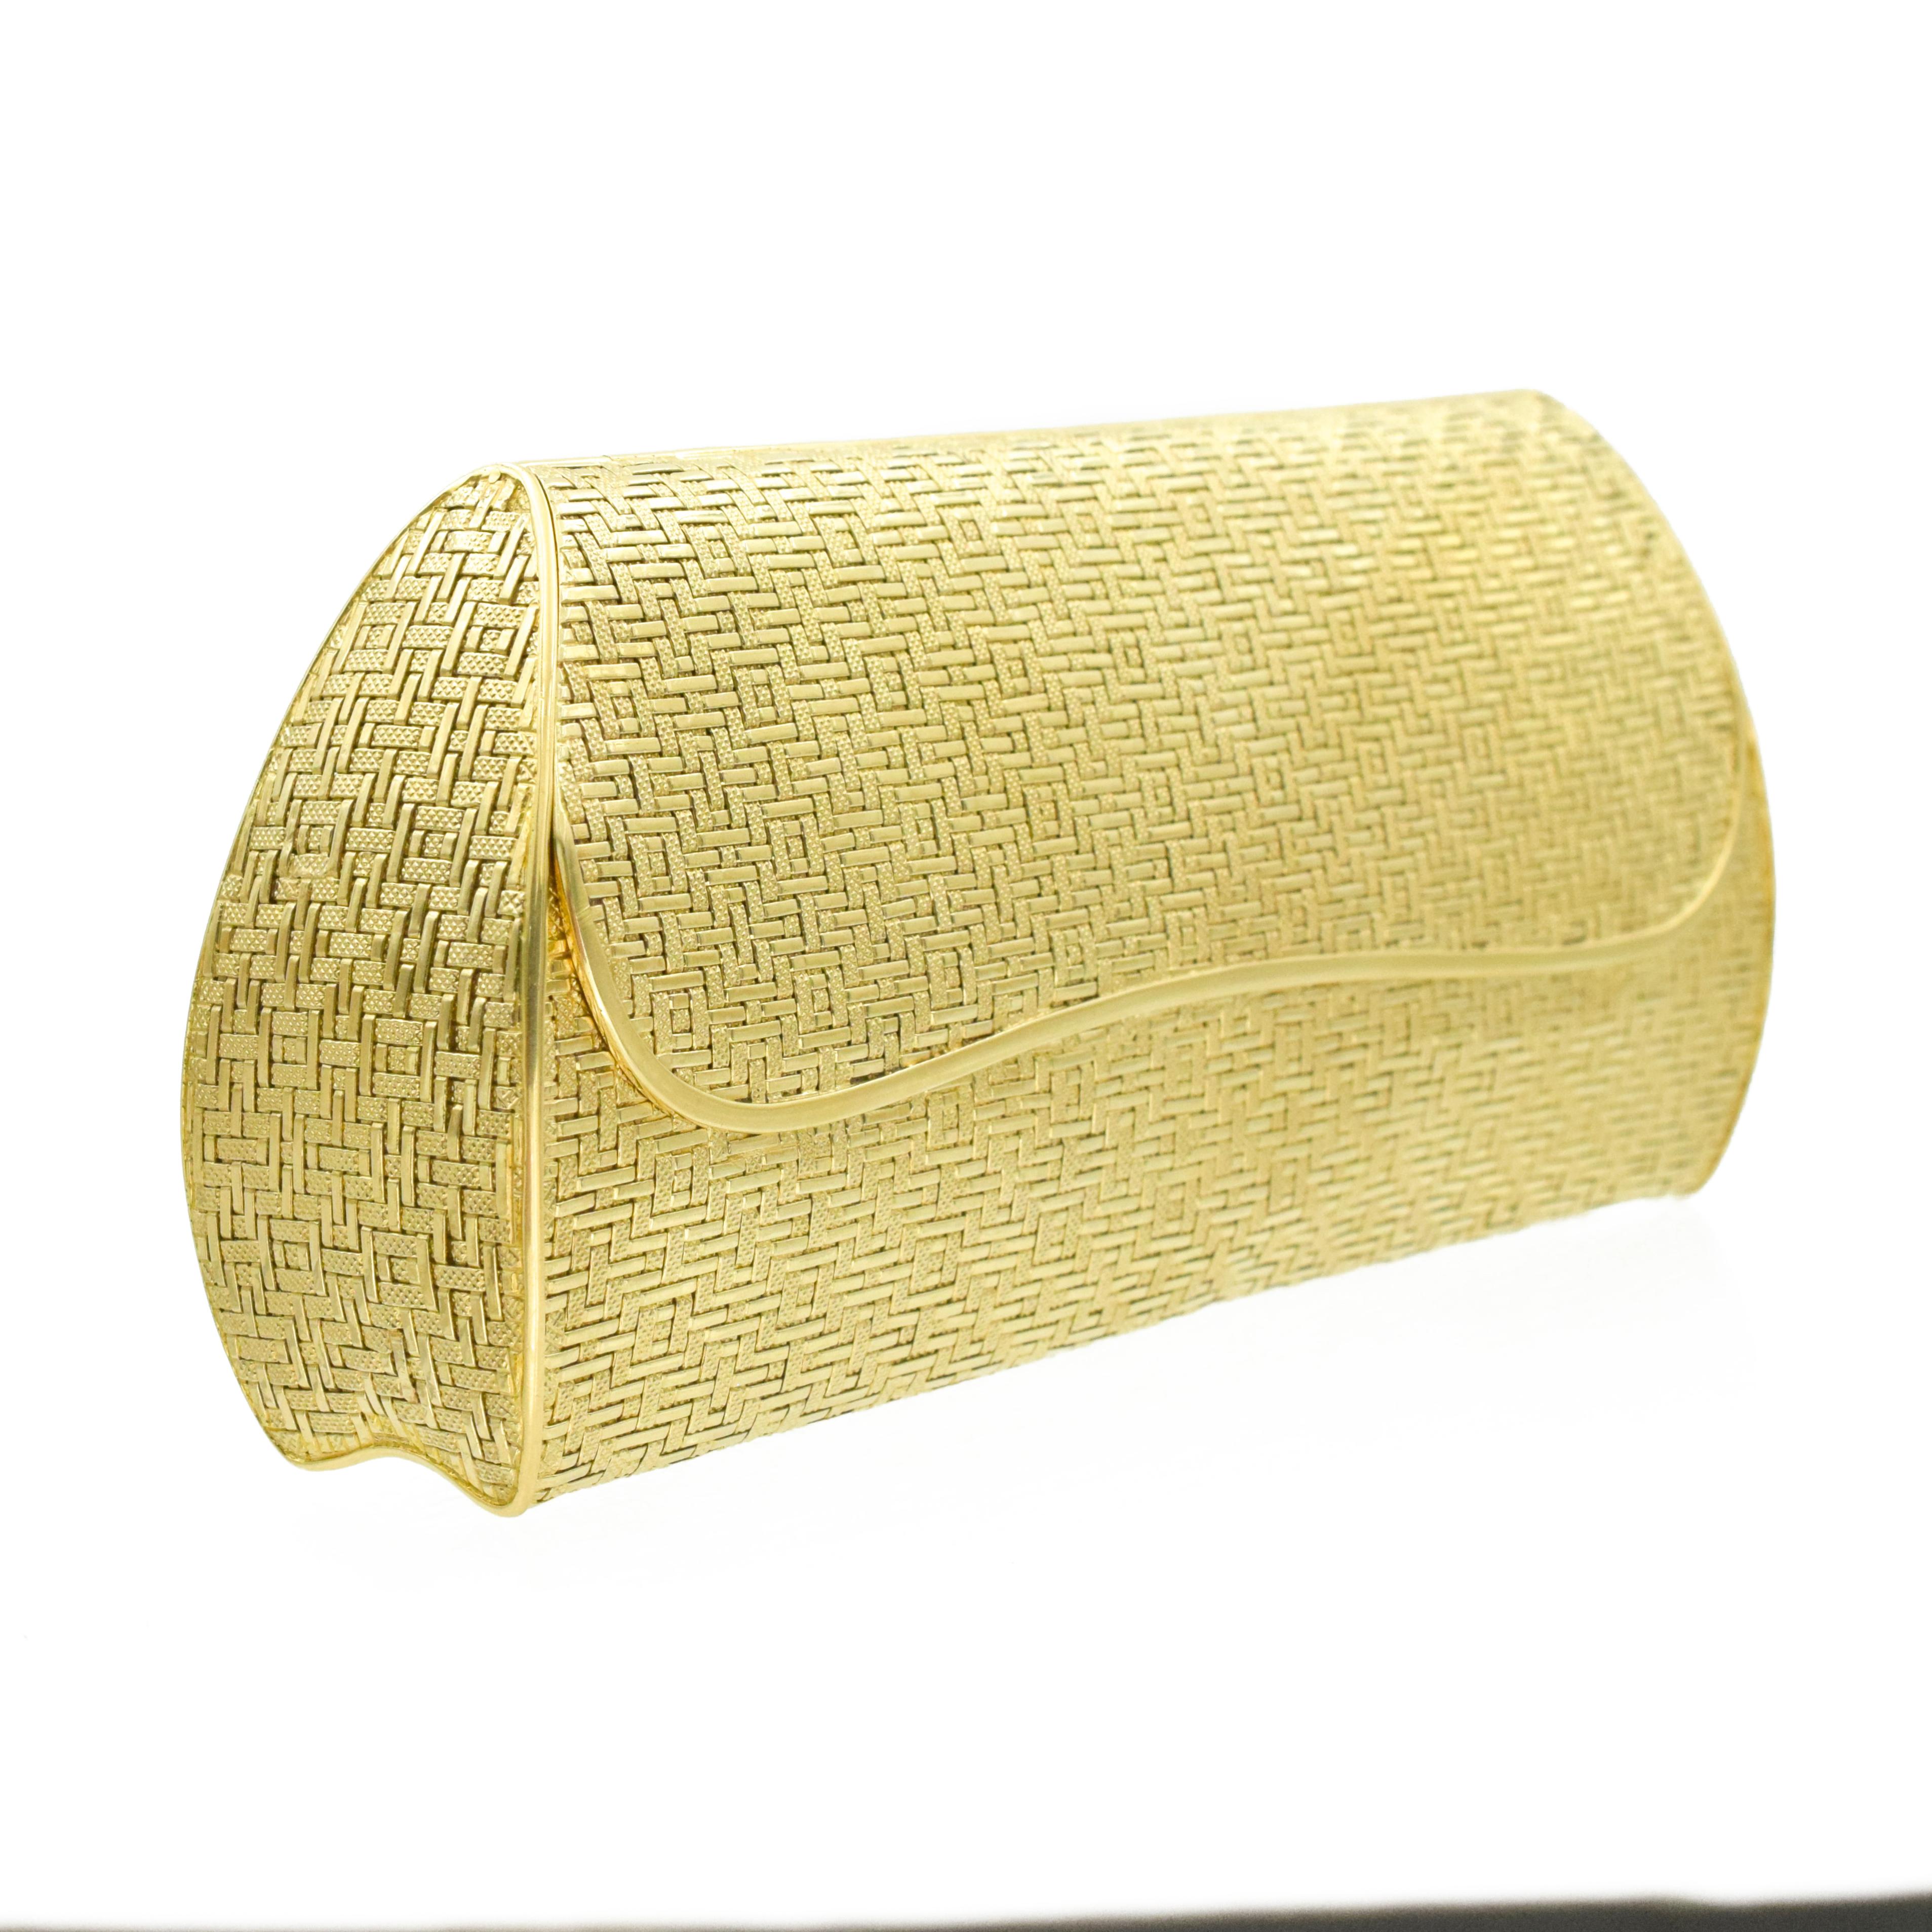 Cartier Woven Two tone 18k Gold Purse. This purse has a woven design of 18k yellow and white gold with a twisted rope chain (length 14 inches). Inside the opening of the purse is a bevelled mirror (4cm x 14-15cm) and the bottom half has a hinged